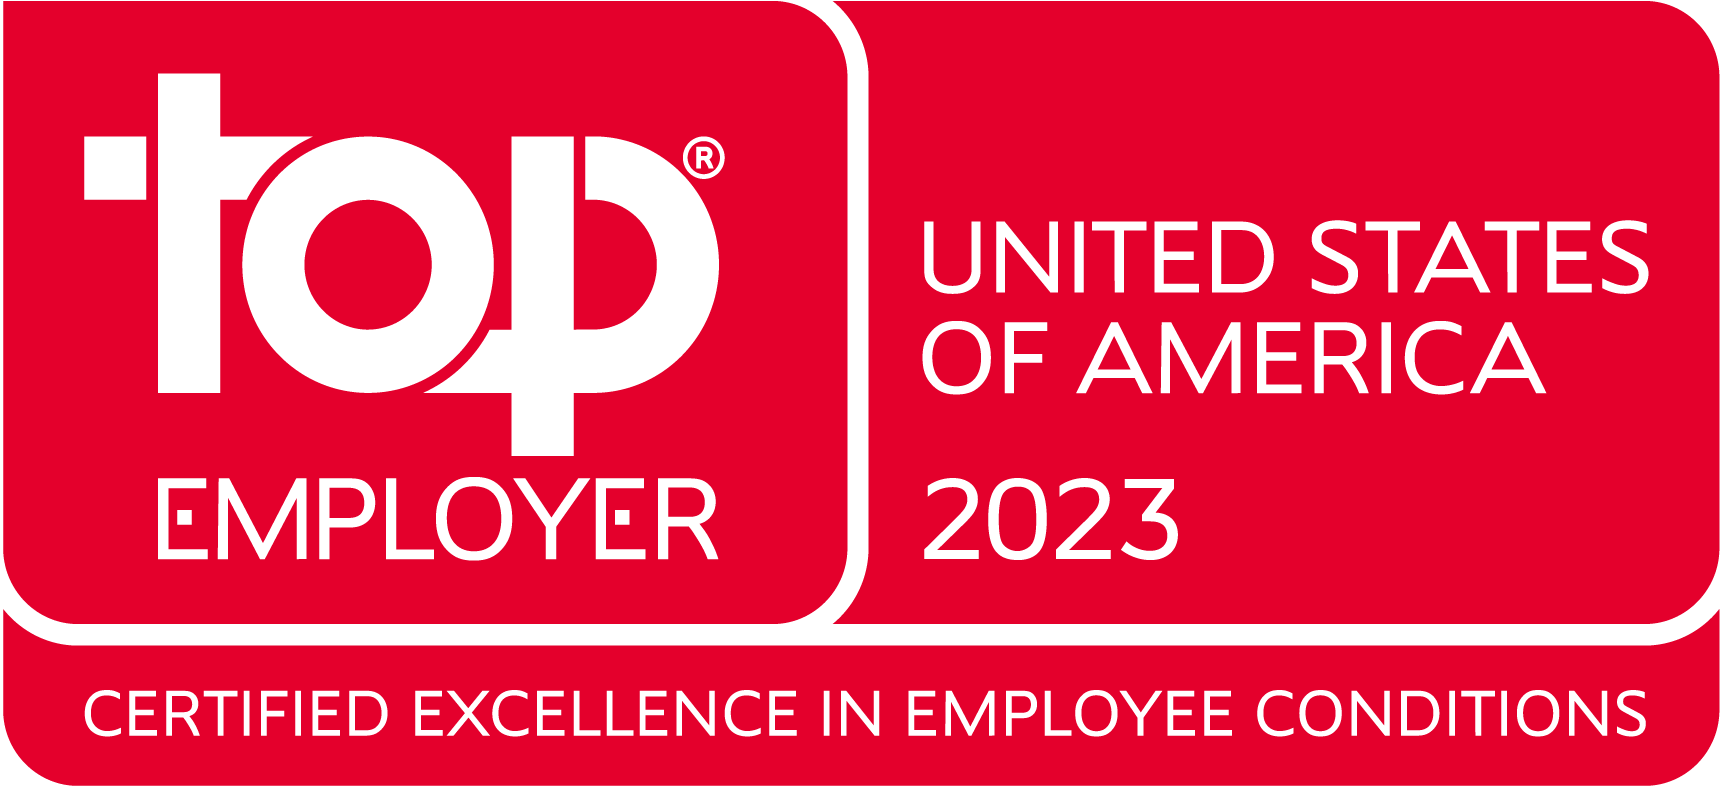 Top_Employer_United_States_of_America_2023.png